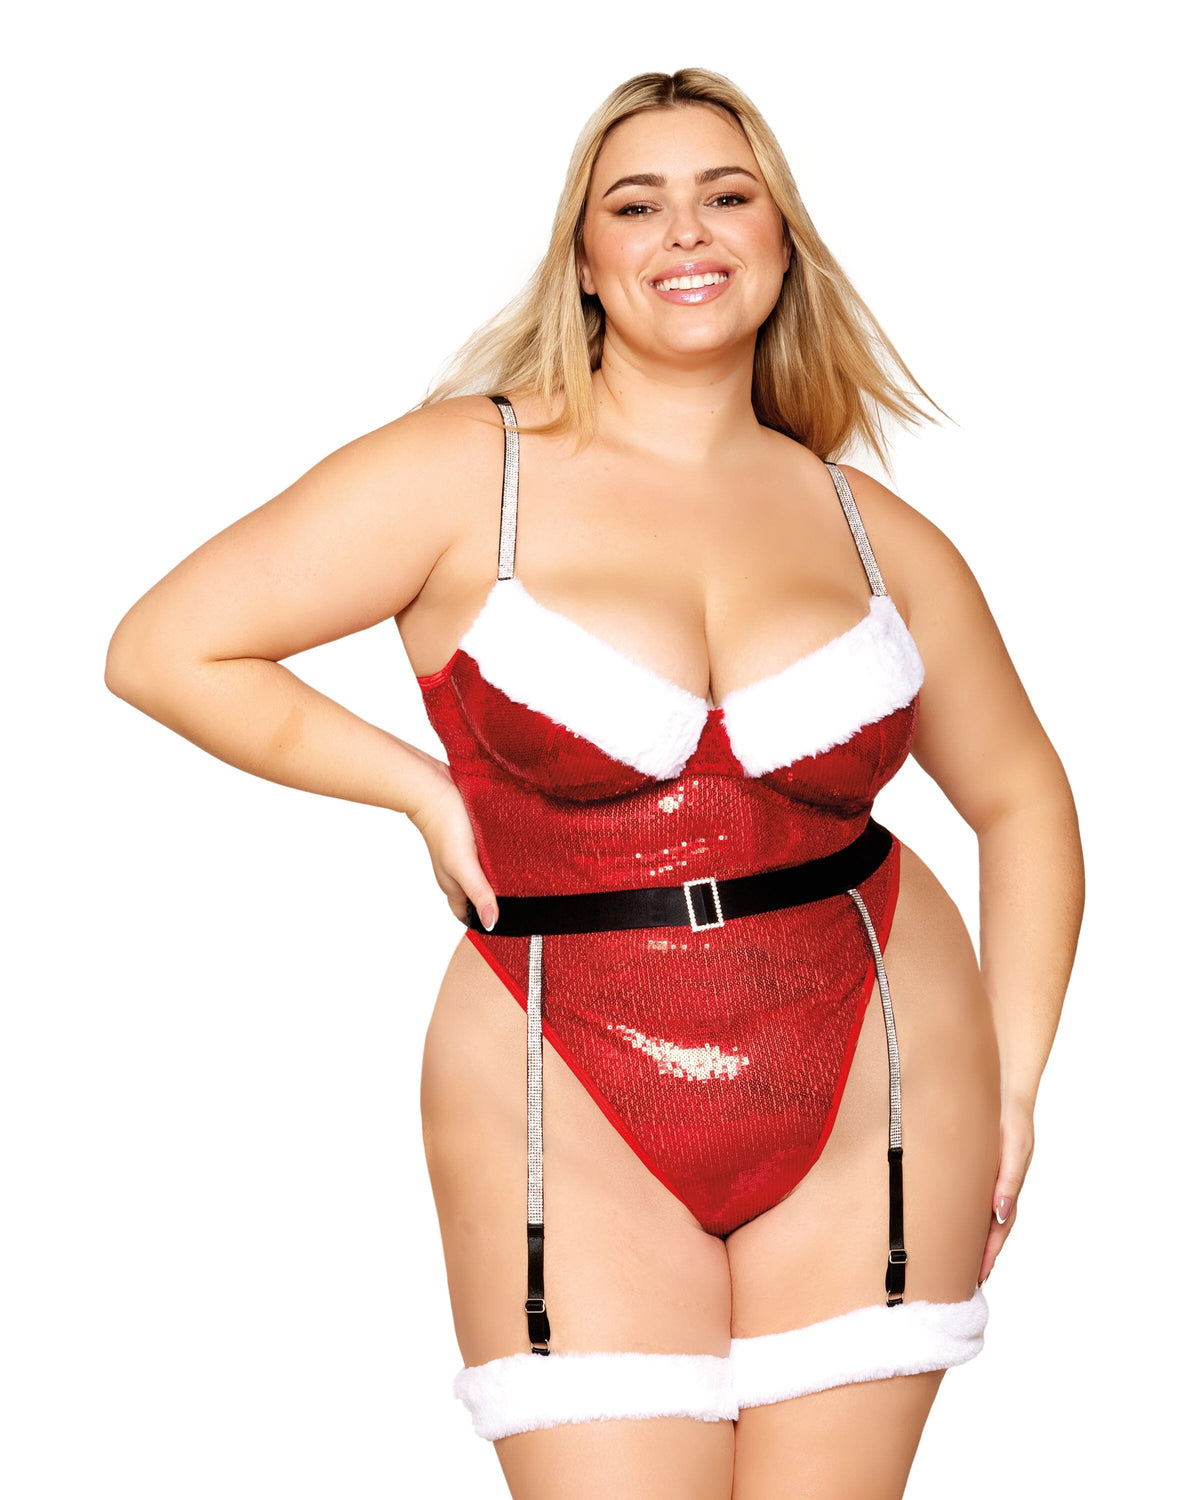 Sequined Mesh and Faux-Fur Trimmed Santa Teddy and Garter Belt Set with Rhinestone Studded Straps and Garters Teddy Dreamgirl 